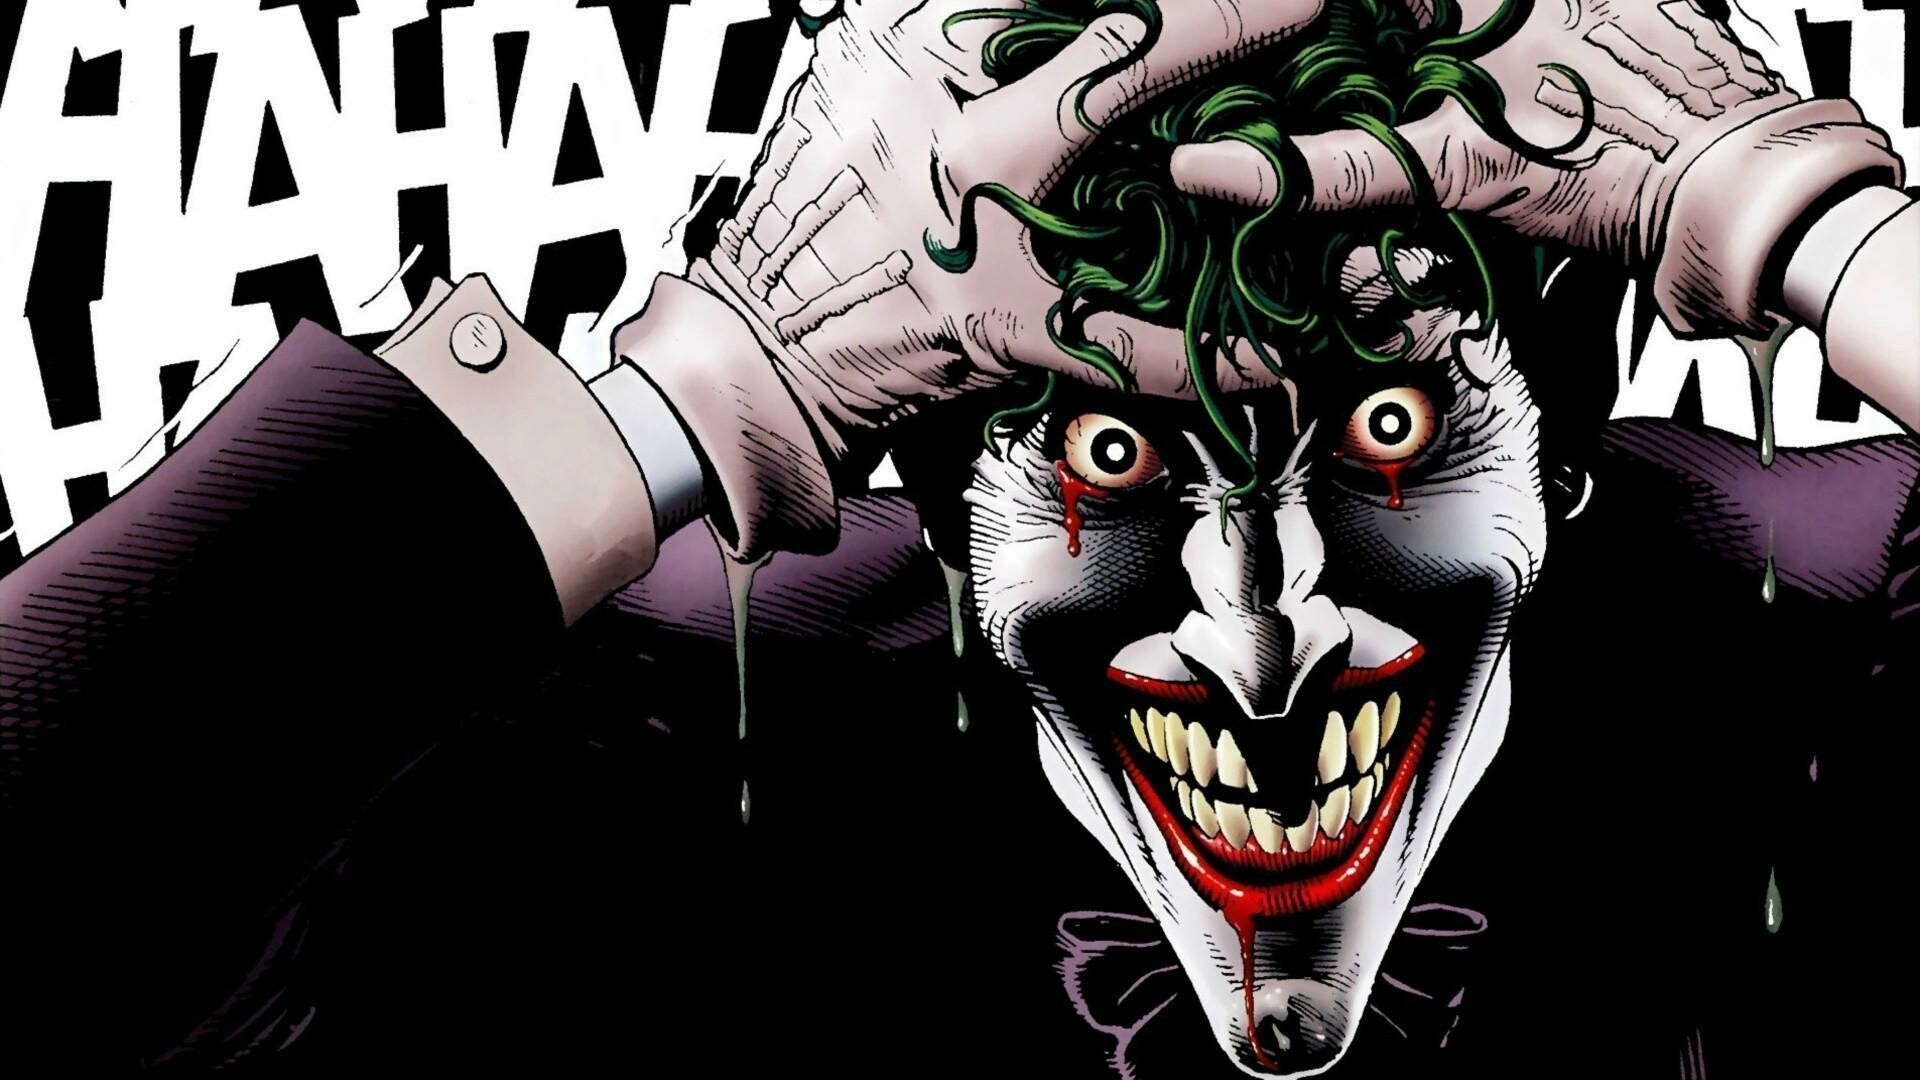 The Joker Comic Wallpaper: HD, 4K, 5K for PC and Mobile. Download free image for iPhone, Android